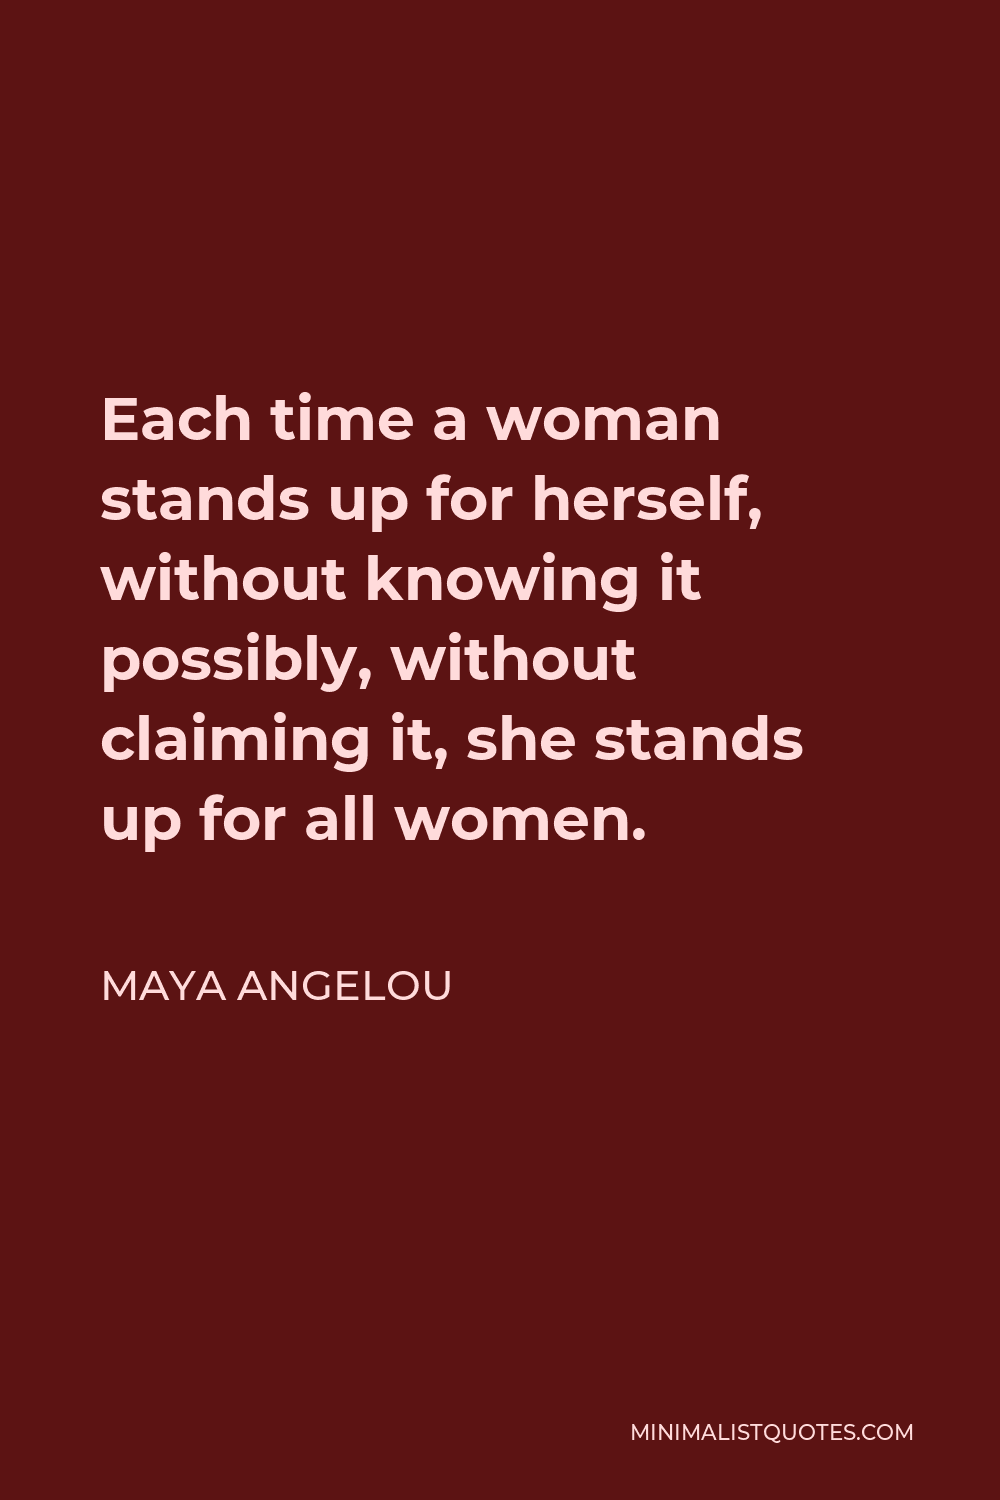 Each time a woman stands up for herself she stands up for all